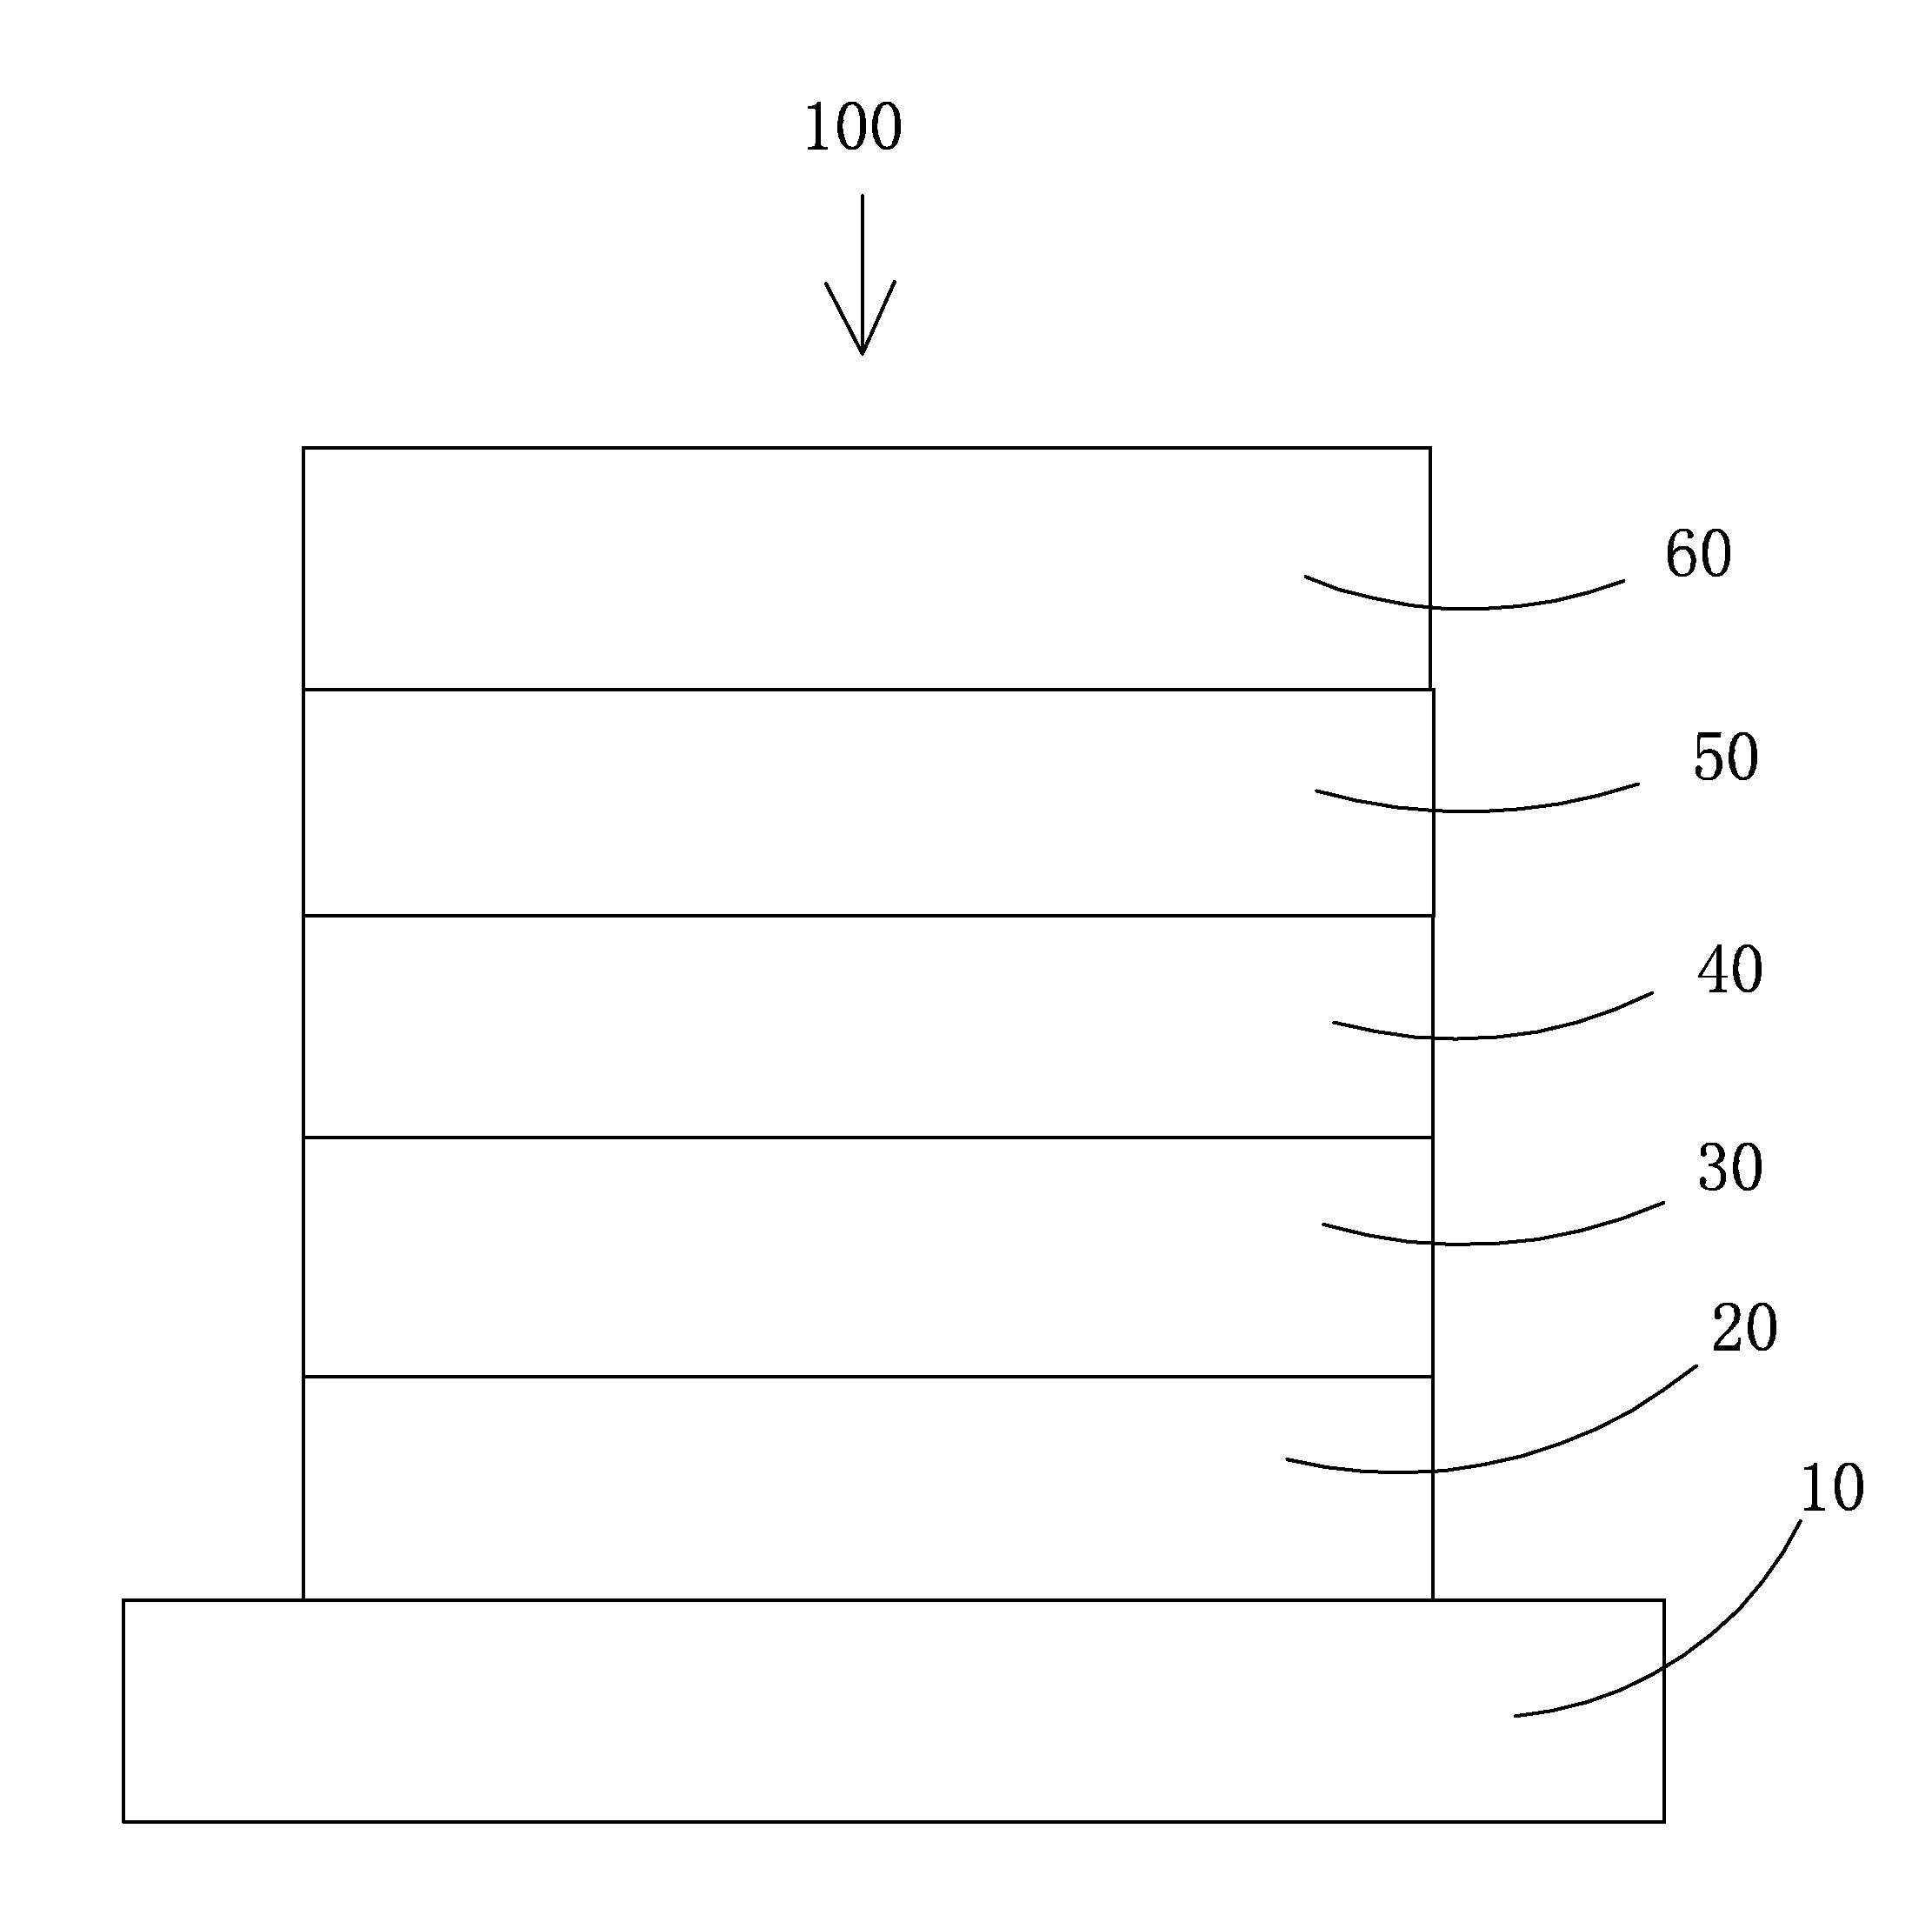 A Sulfone Group-Containing Compound, An Organic Light Emitting Diode (OLED) Device Using The Same, and A Method of Fabricating the OLED Device